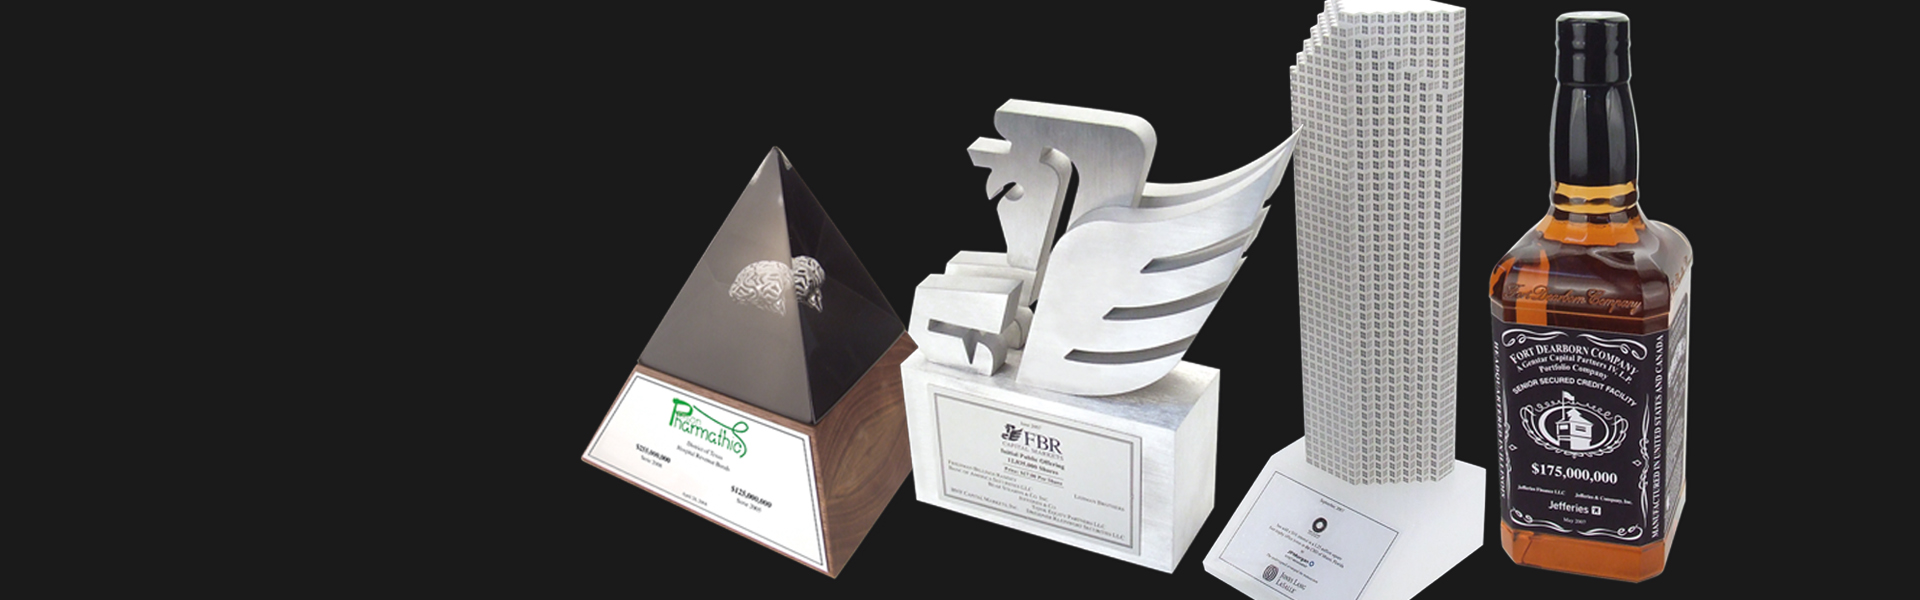 Leader in manufacturing awards